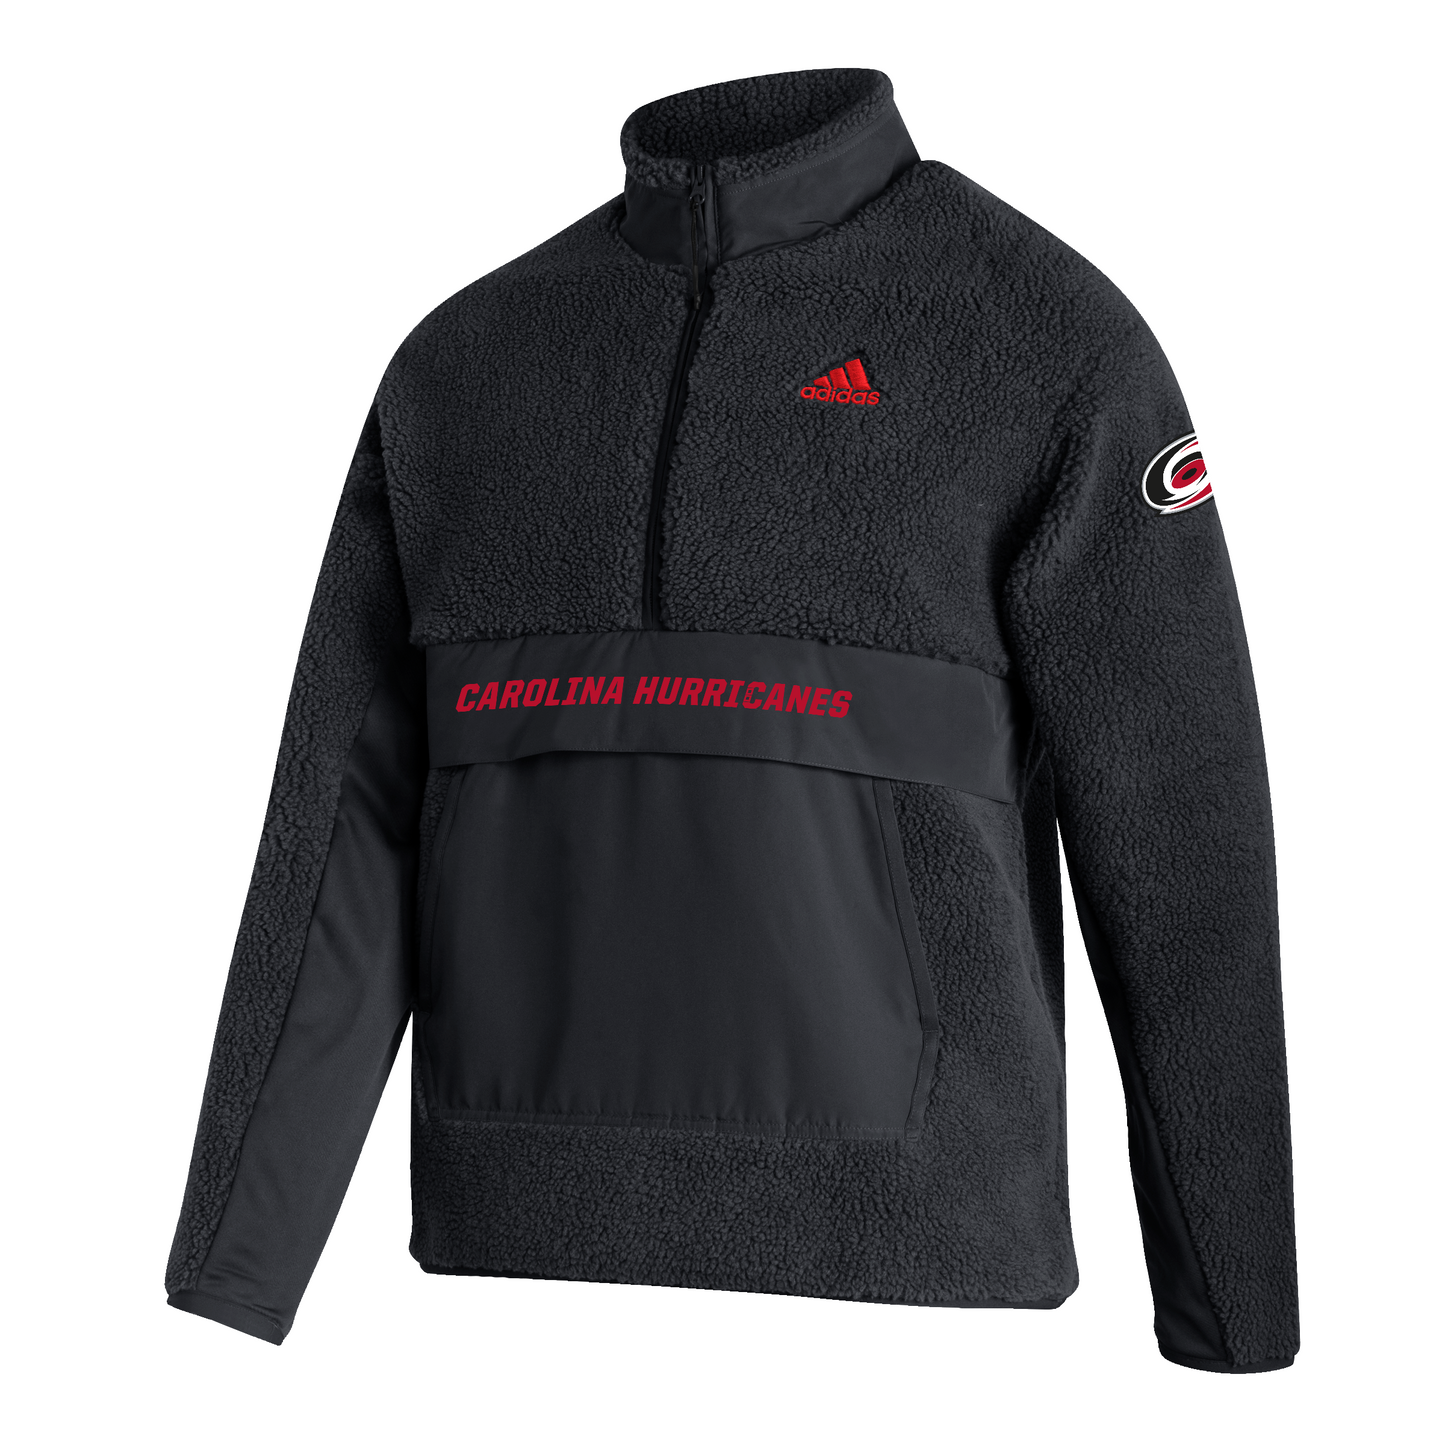 Front View: Black sherpa with Carolina Hurricanes text and red Adidas logo.